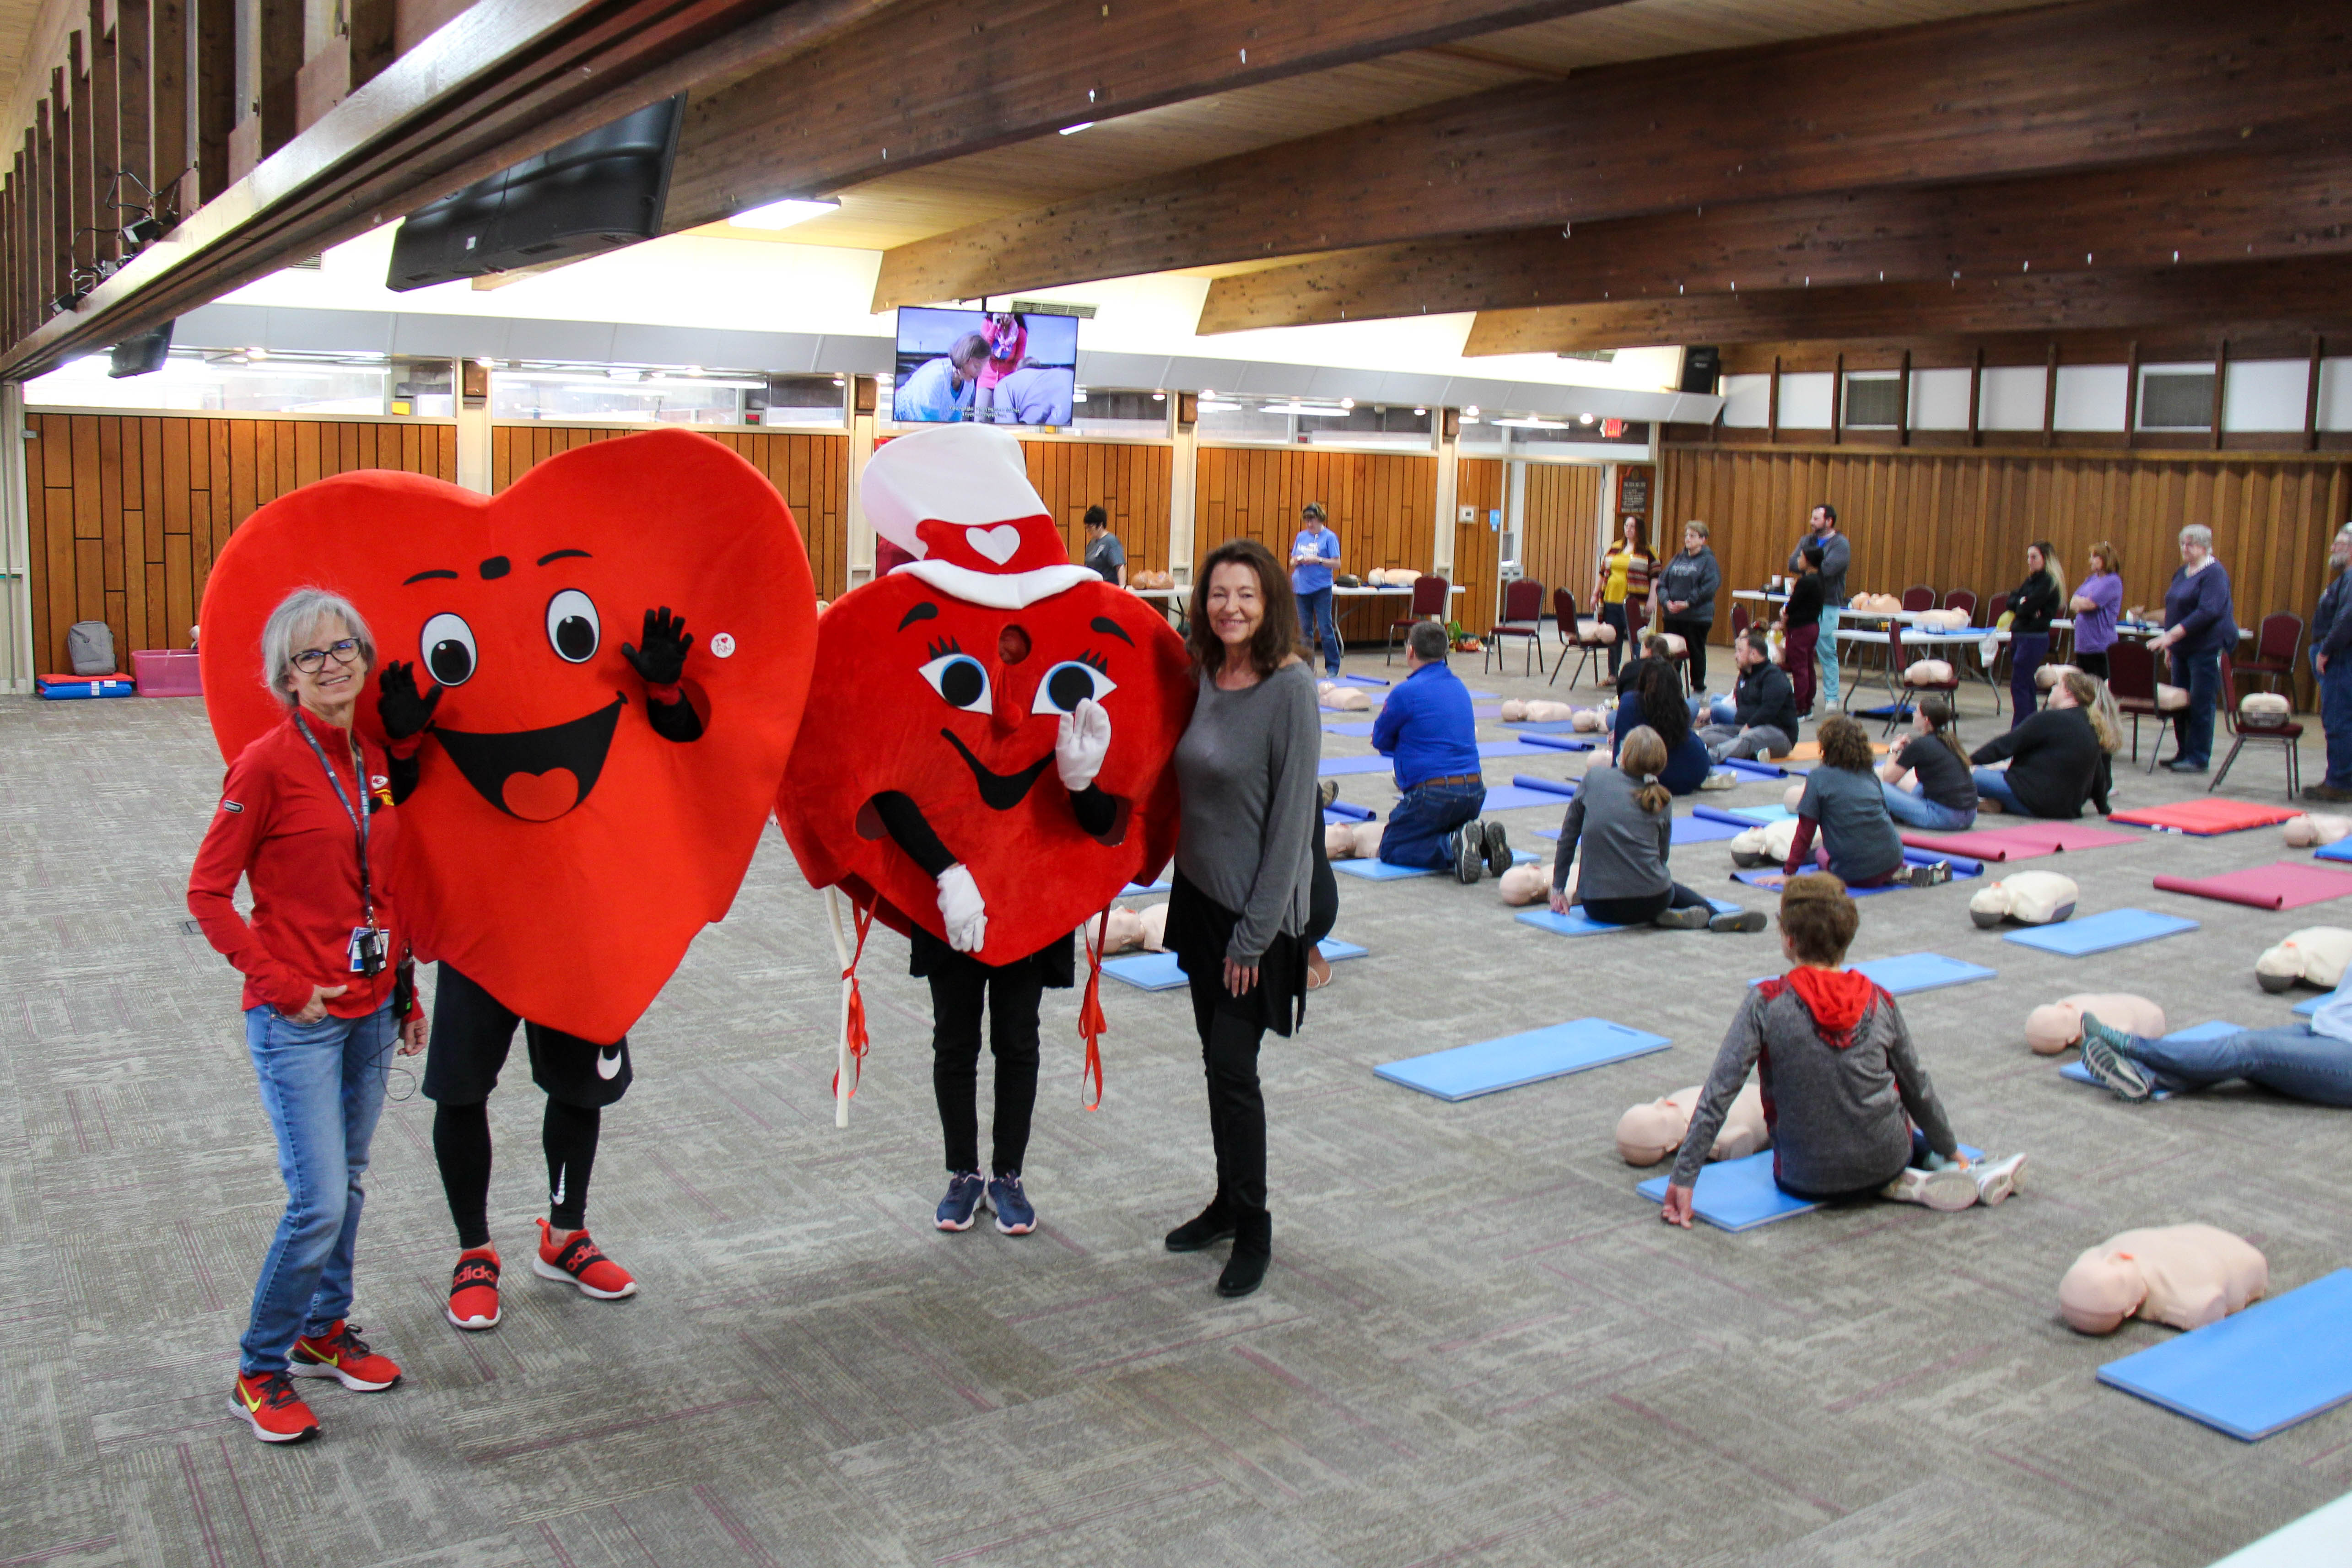 Standing with the two Beats Go On mascots Willy & Mary Beat, co-chairs Mel Burnett (left) and Paula Radcliff (right) proudly host participants in the community-wide CPR training at Baden Square.